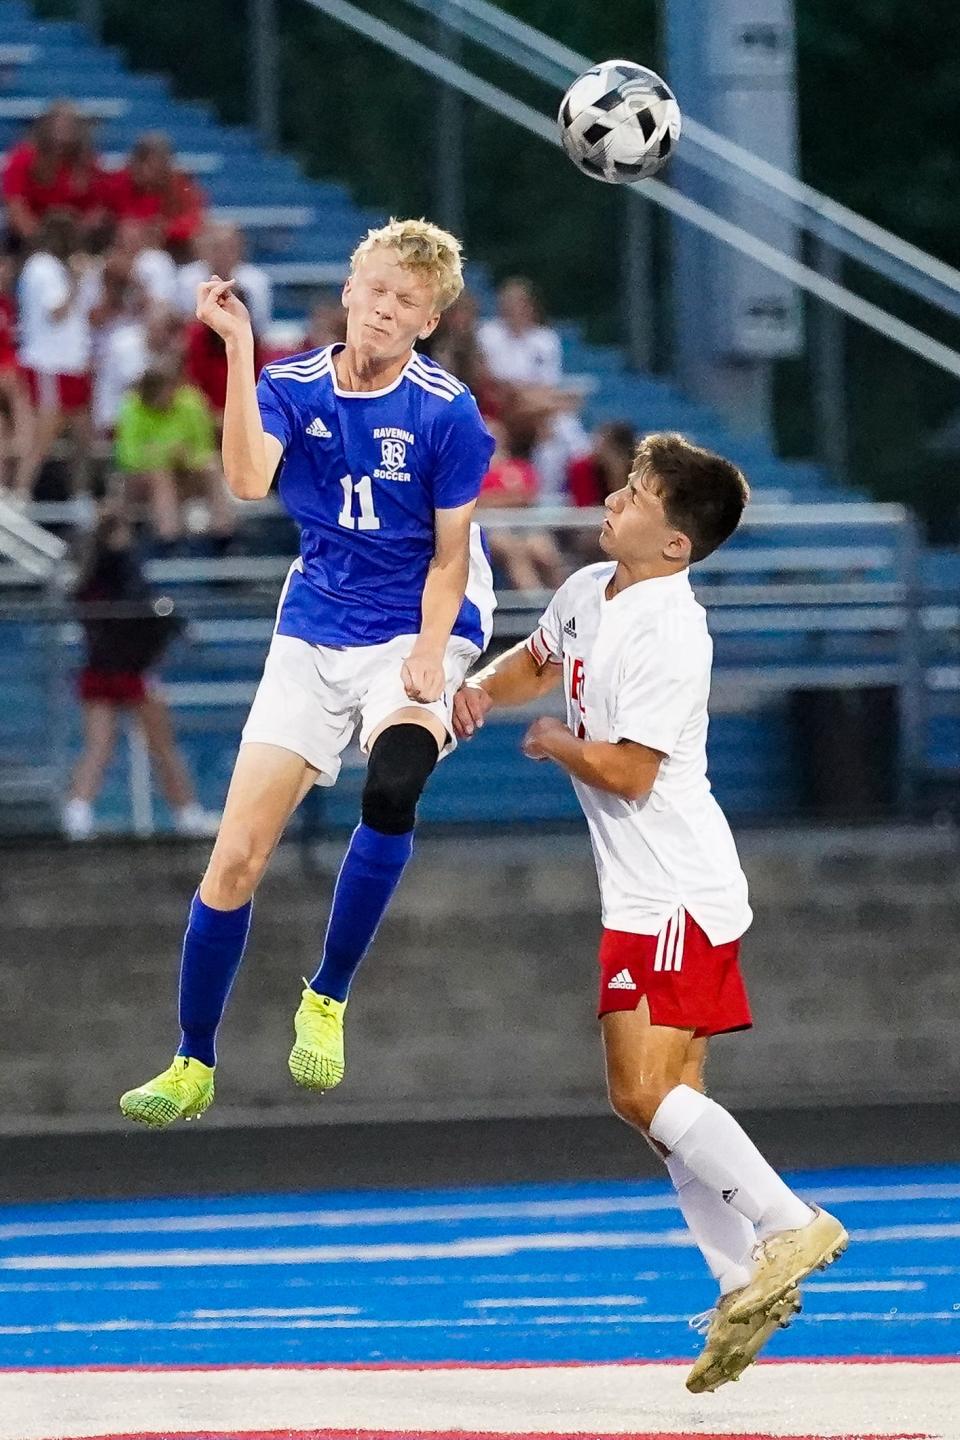 Ravenna's Mason Ward, left, goes up to win a ball in the air August 31, 2021.